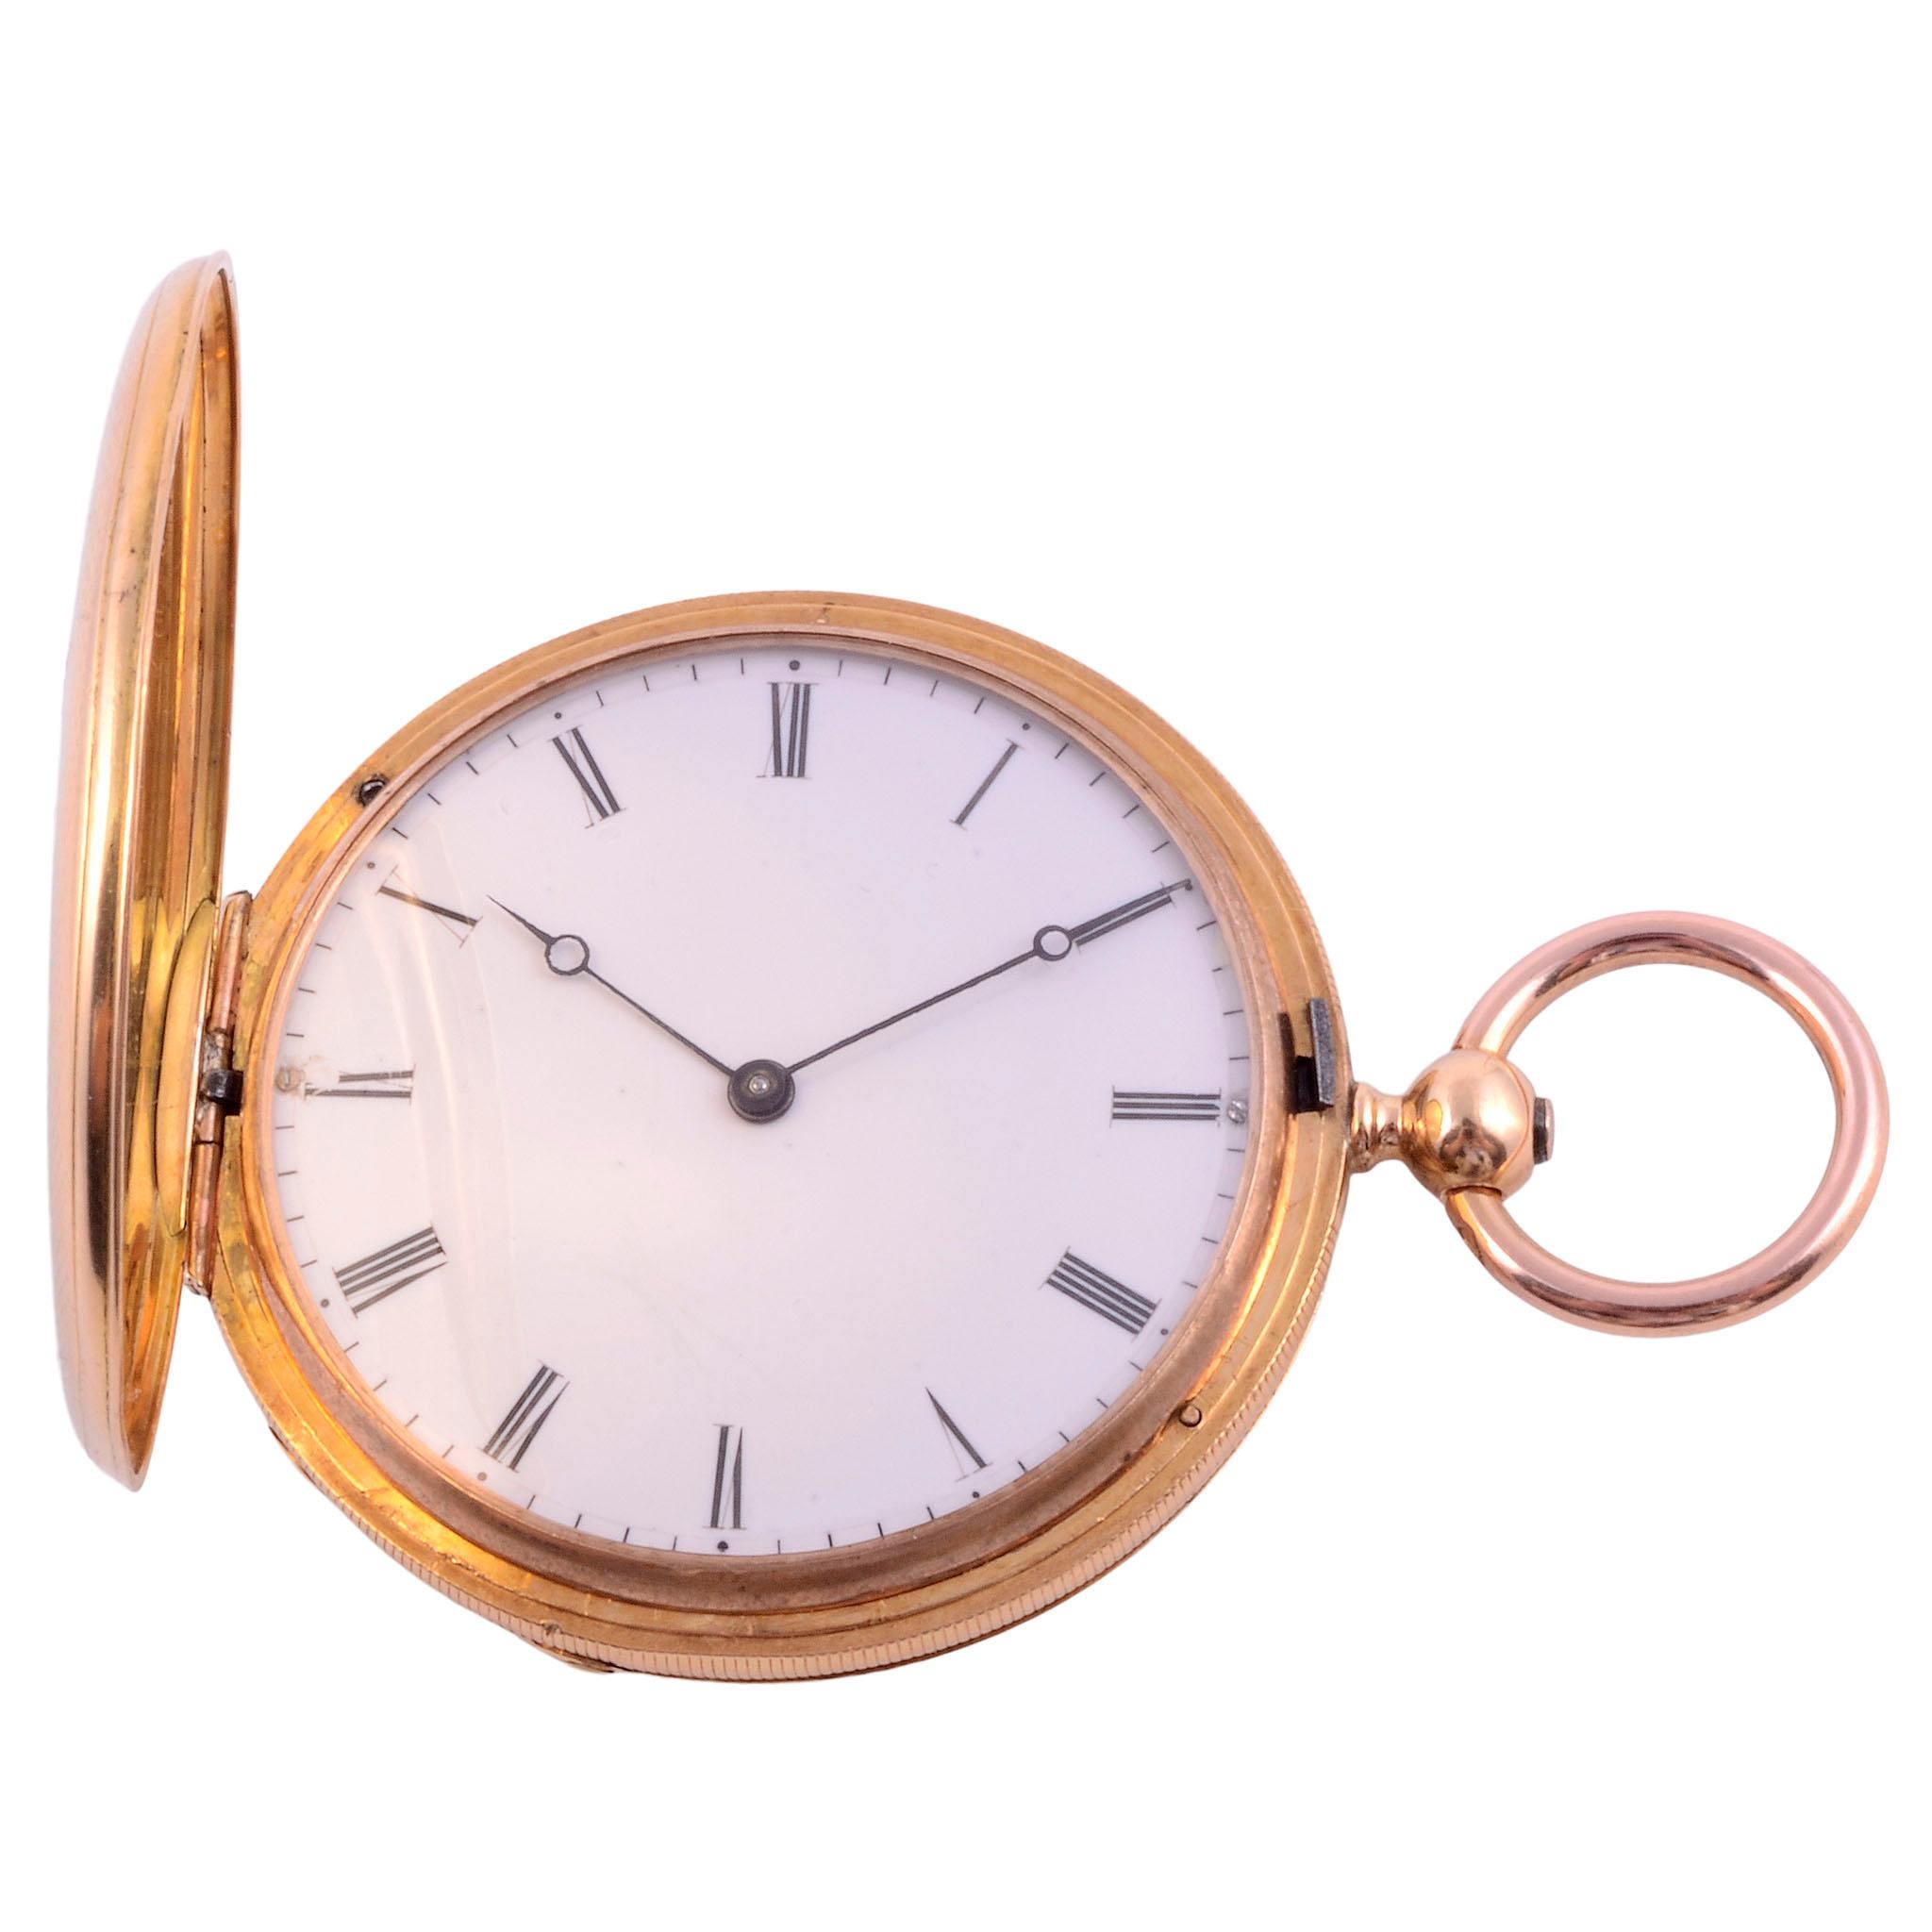 Antique Patek Philippe enameled 18K pocket watch, circa 1850. This 18 karat yellow gold key wind hunter case pocket watch made by Patek Philippe features enamel and engraving on both sides. The case is signed N5090 FY & E NY Patek Philippe 1 Geneve.